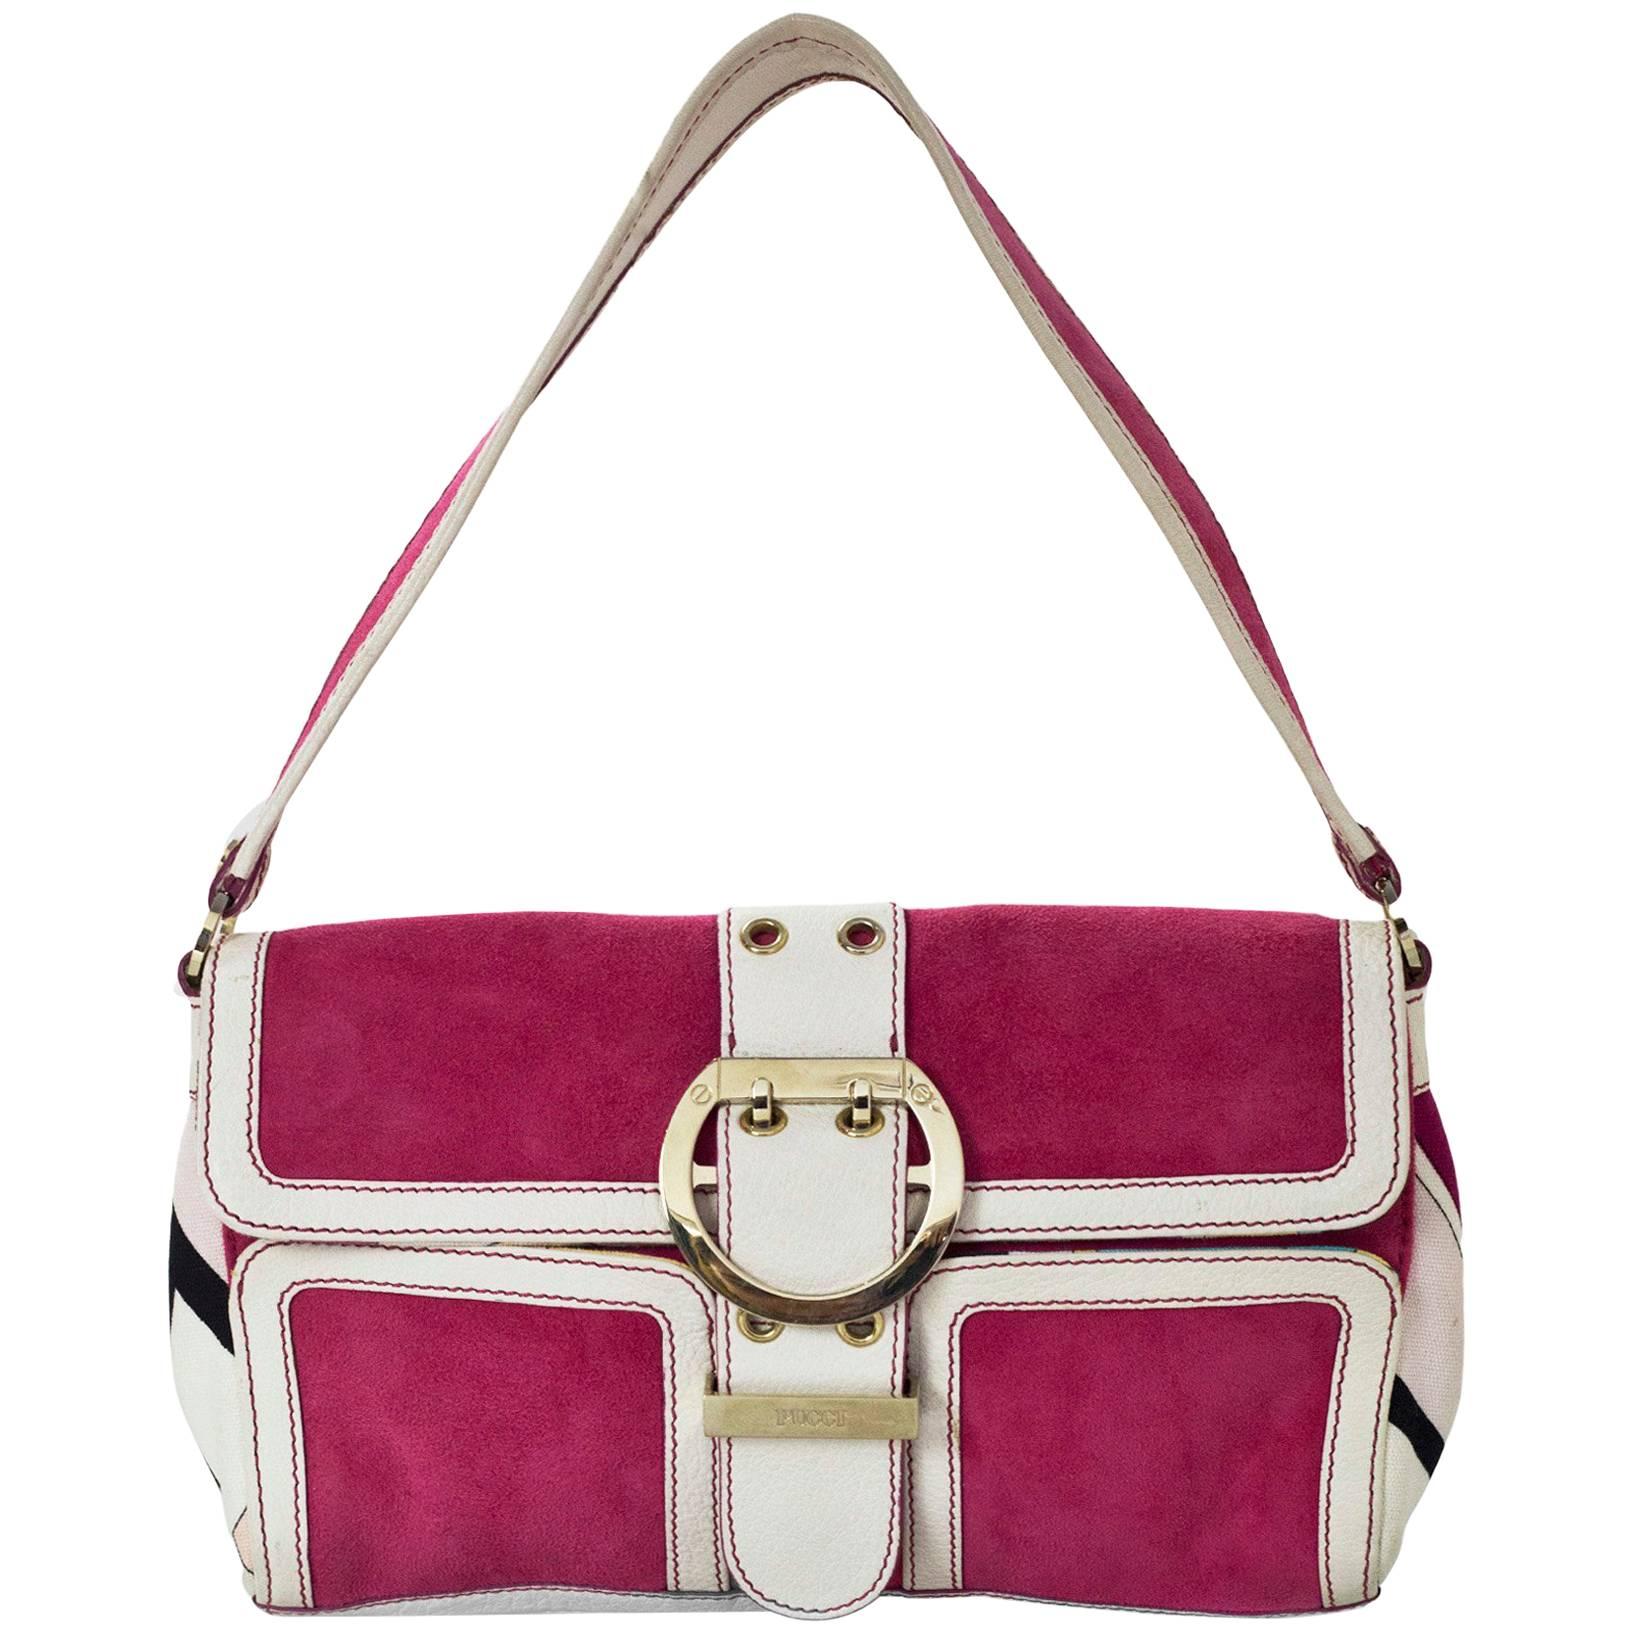 Emilio Pucci Pink Suede & White Leather Buckle Shoulder Bag